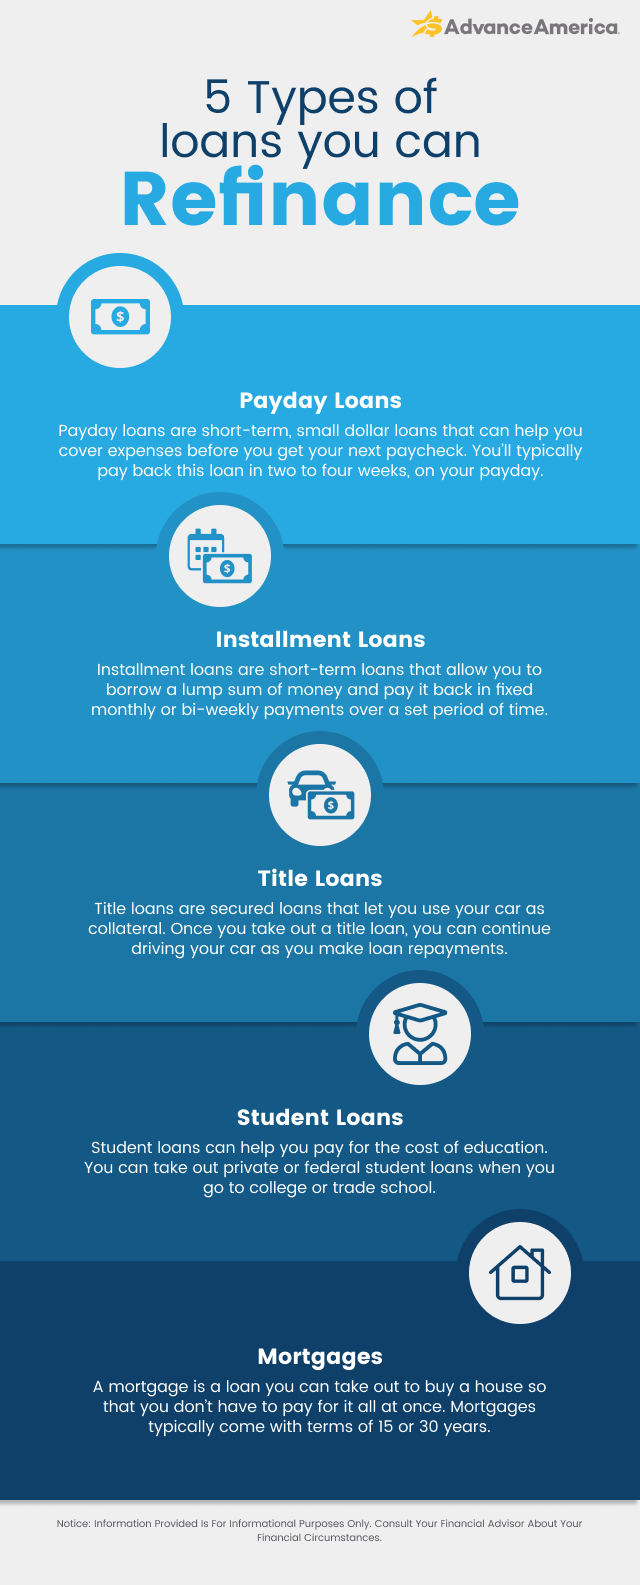 5 types of loans you can refinance